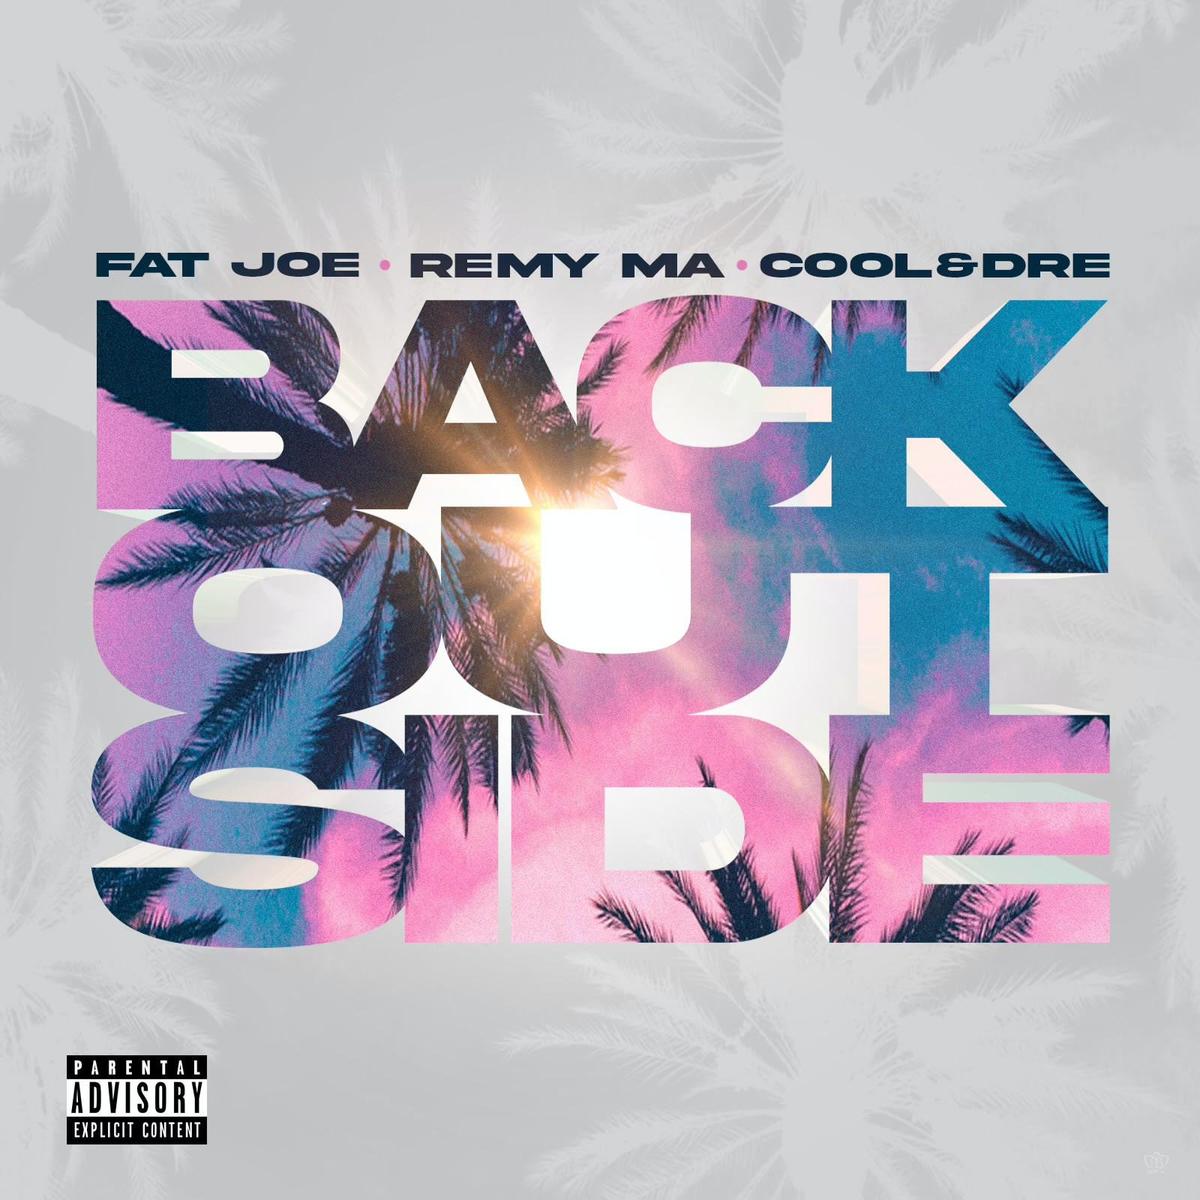 Fat Joe, Remy Ma & Cool & Dre Proclaim That It’s Time To Go “Back Outside”